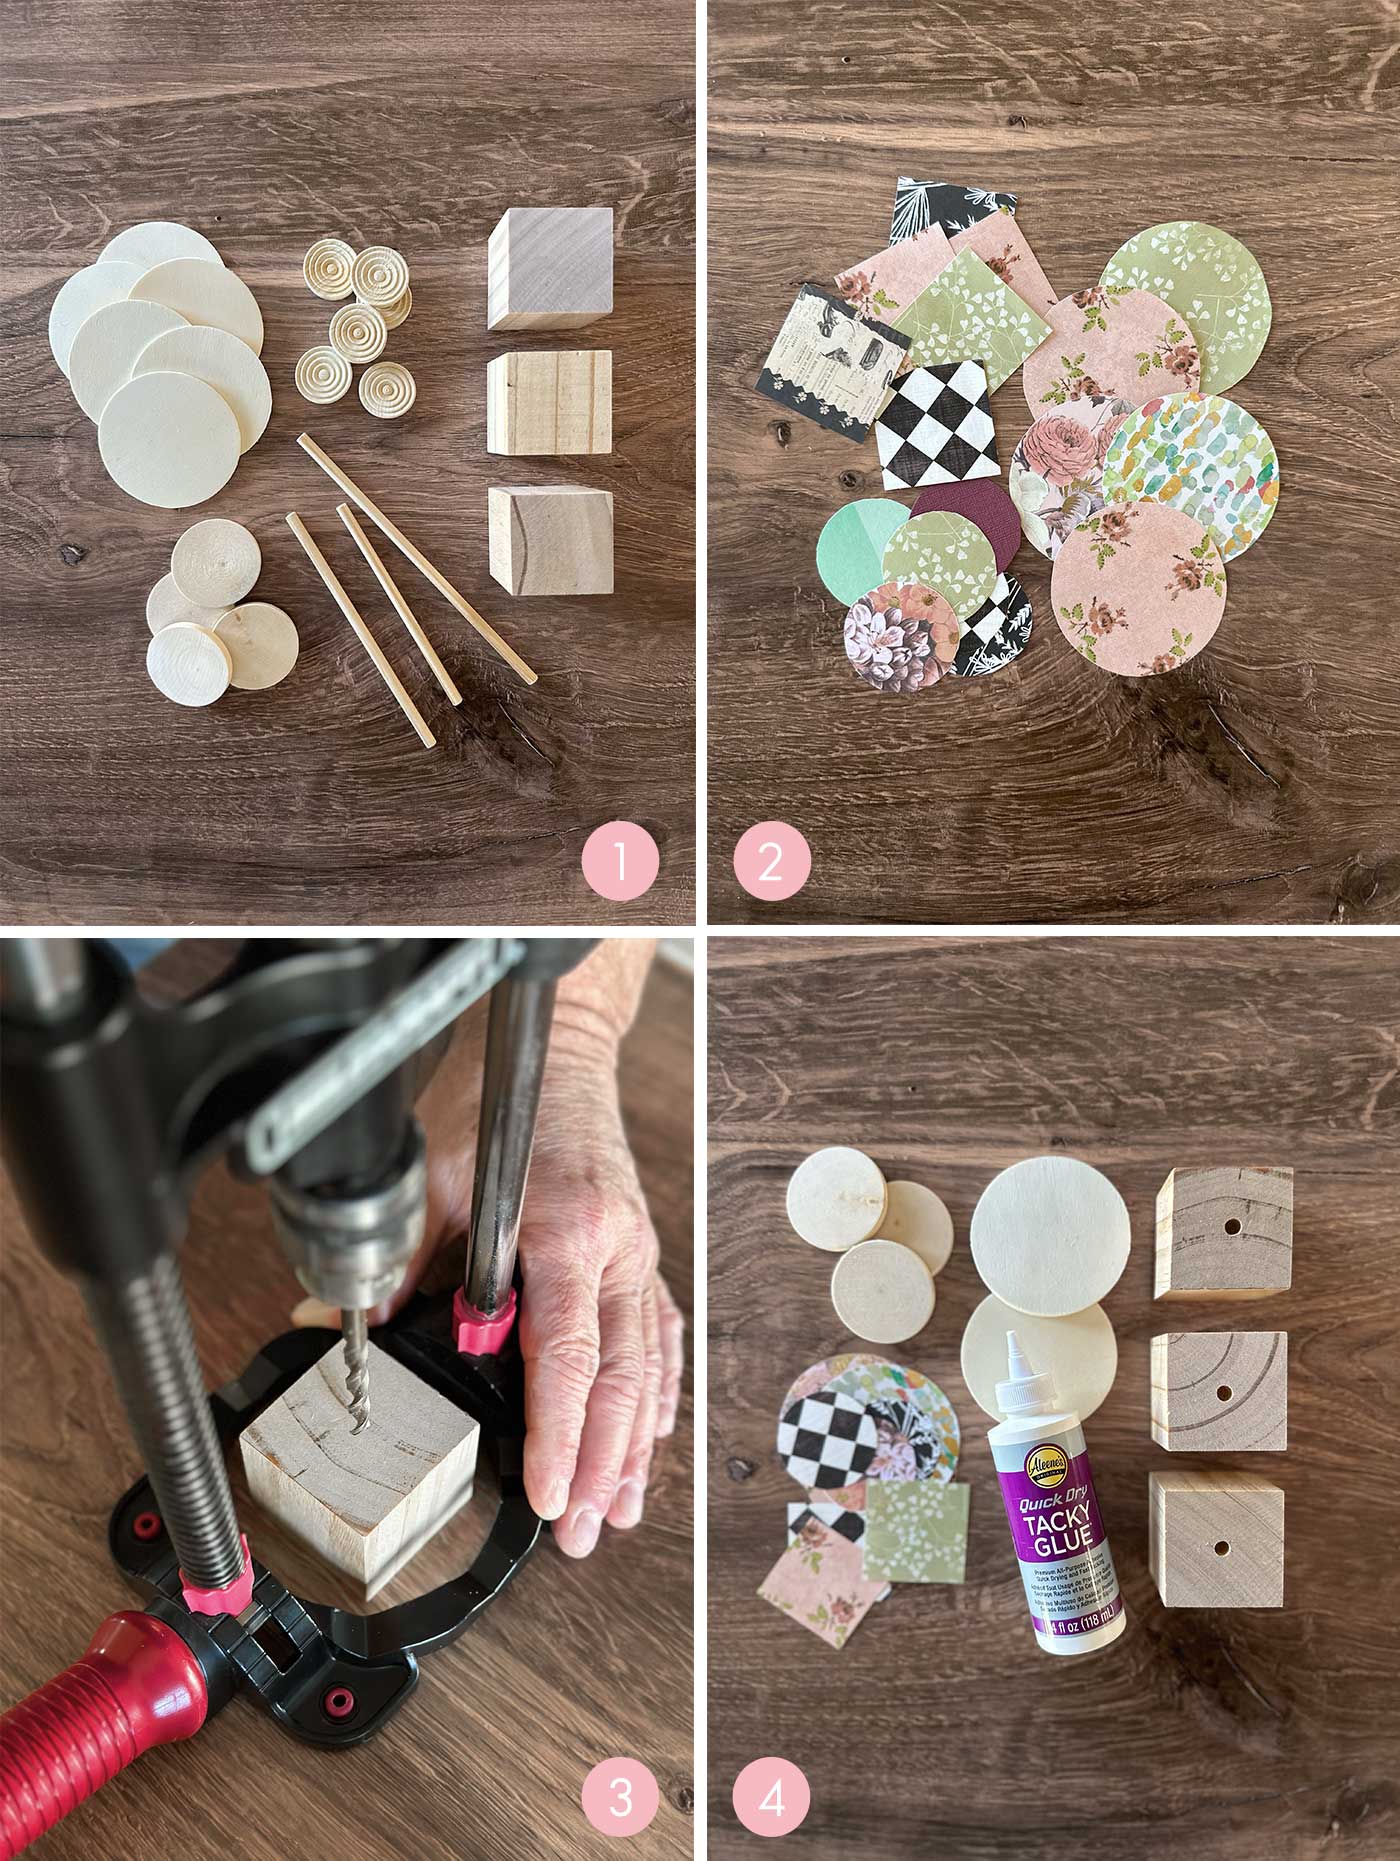 Pictures of how to make wooden flowers